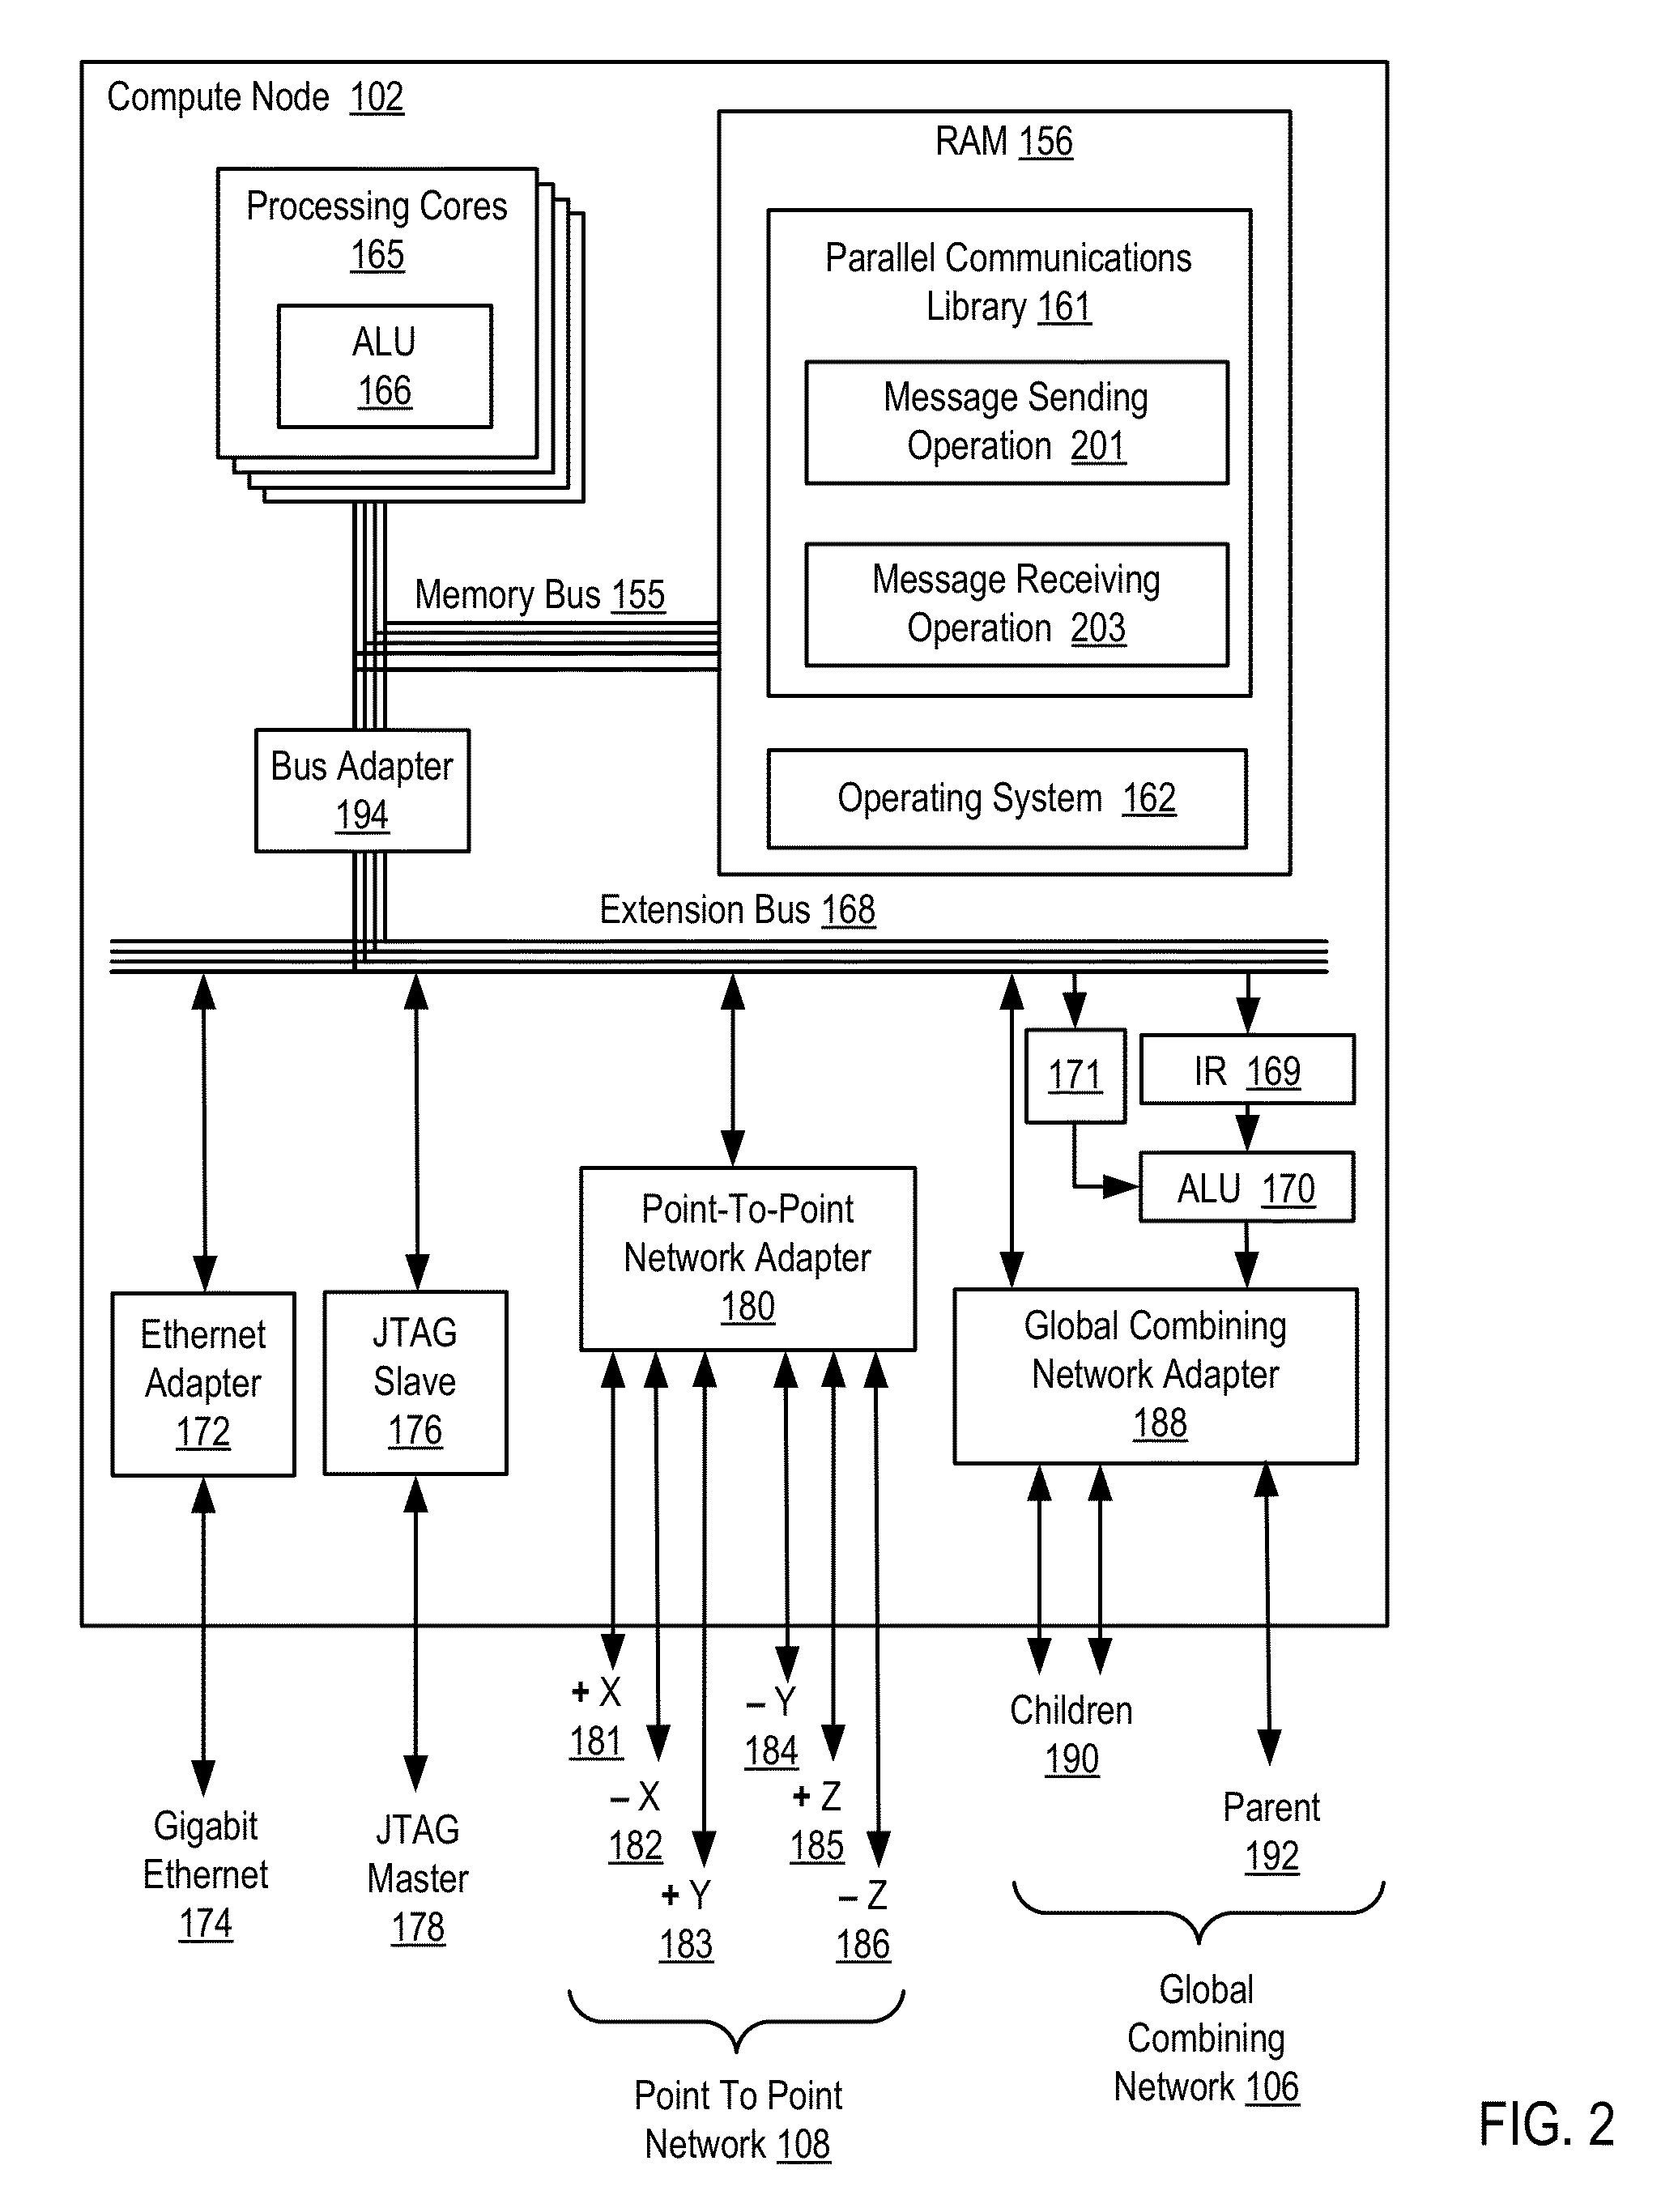 Locality mapping in a distributed processing system